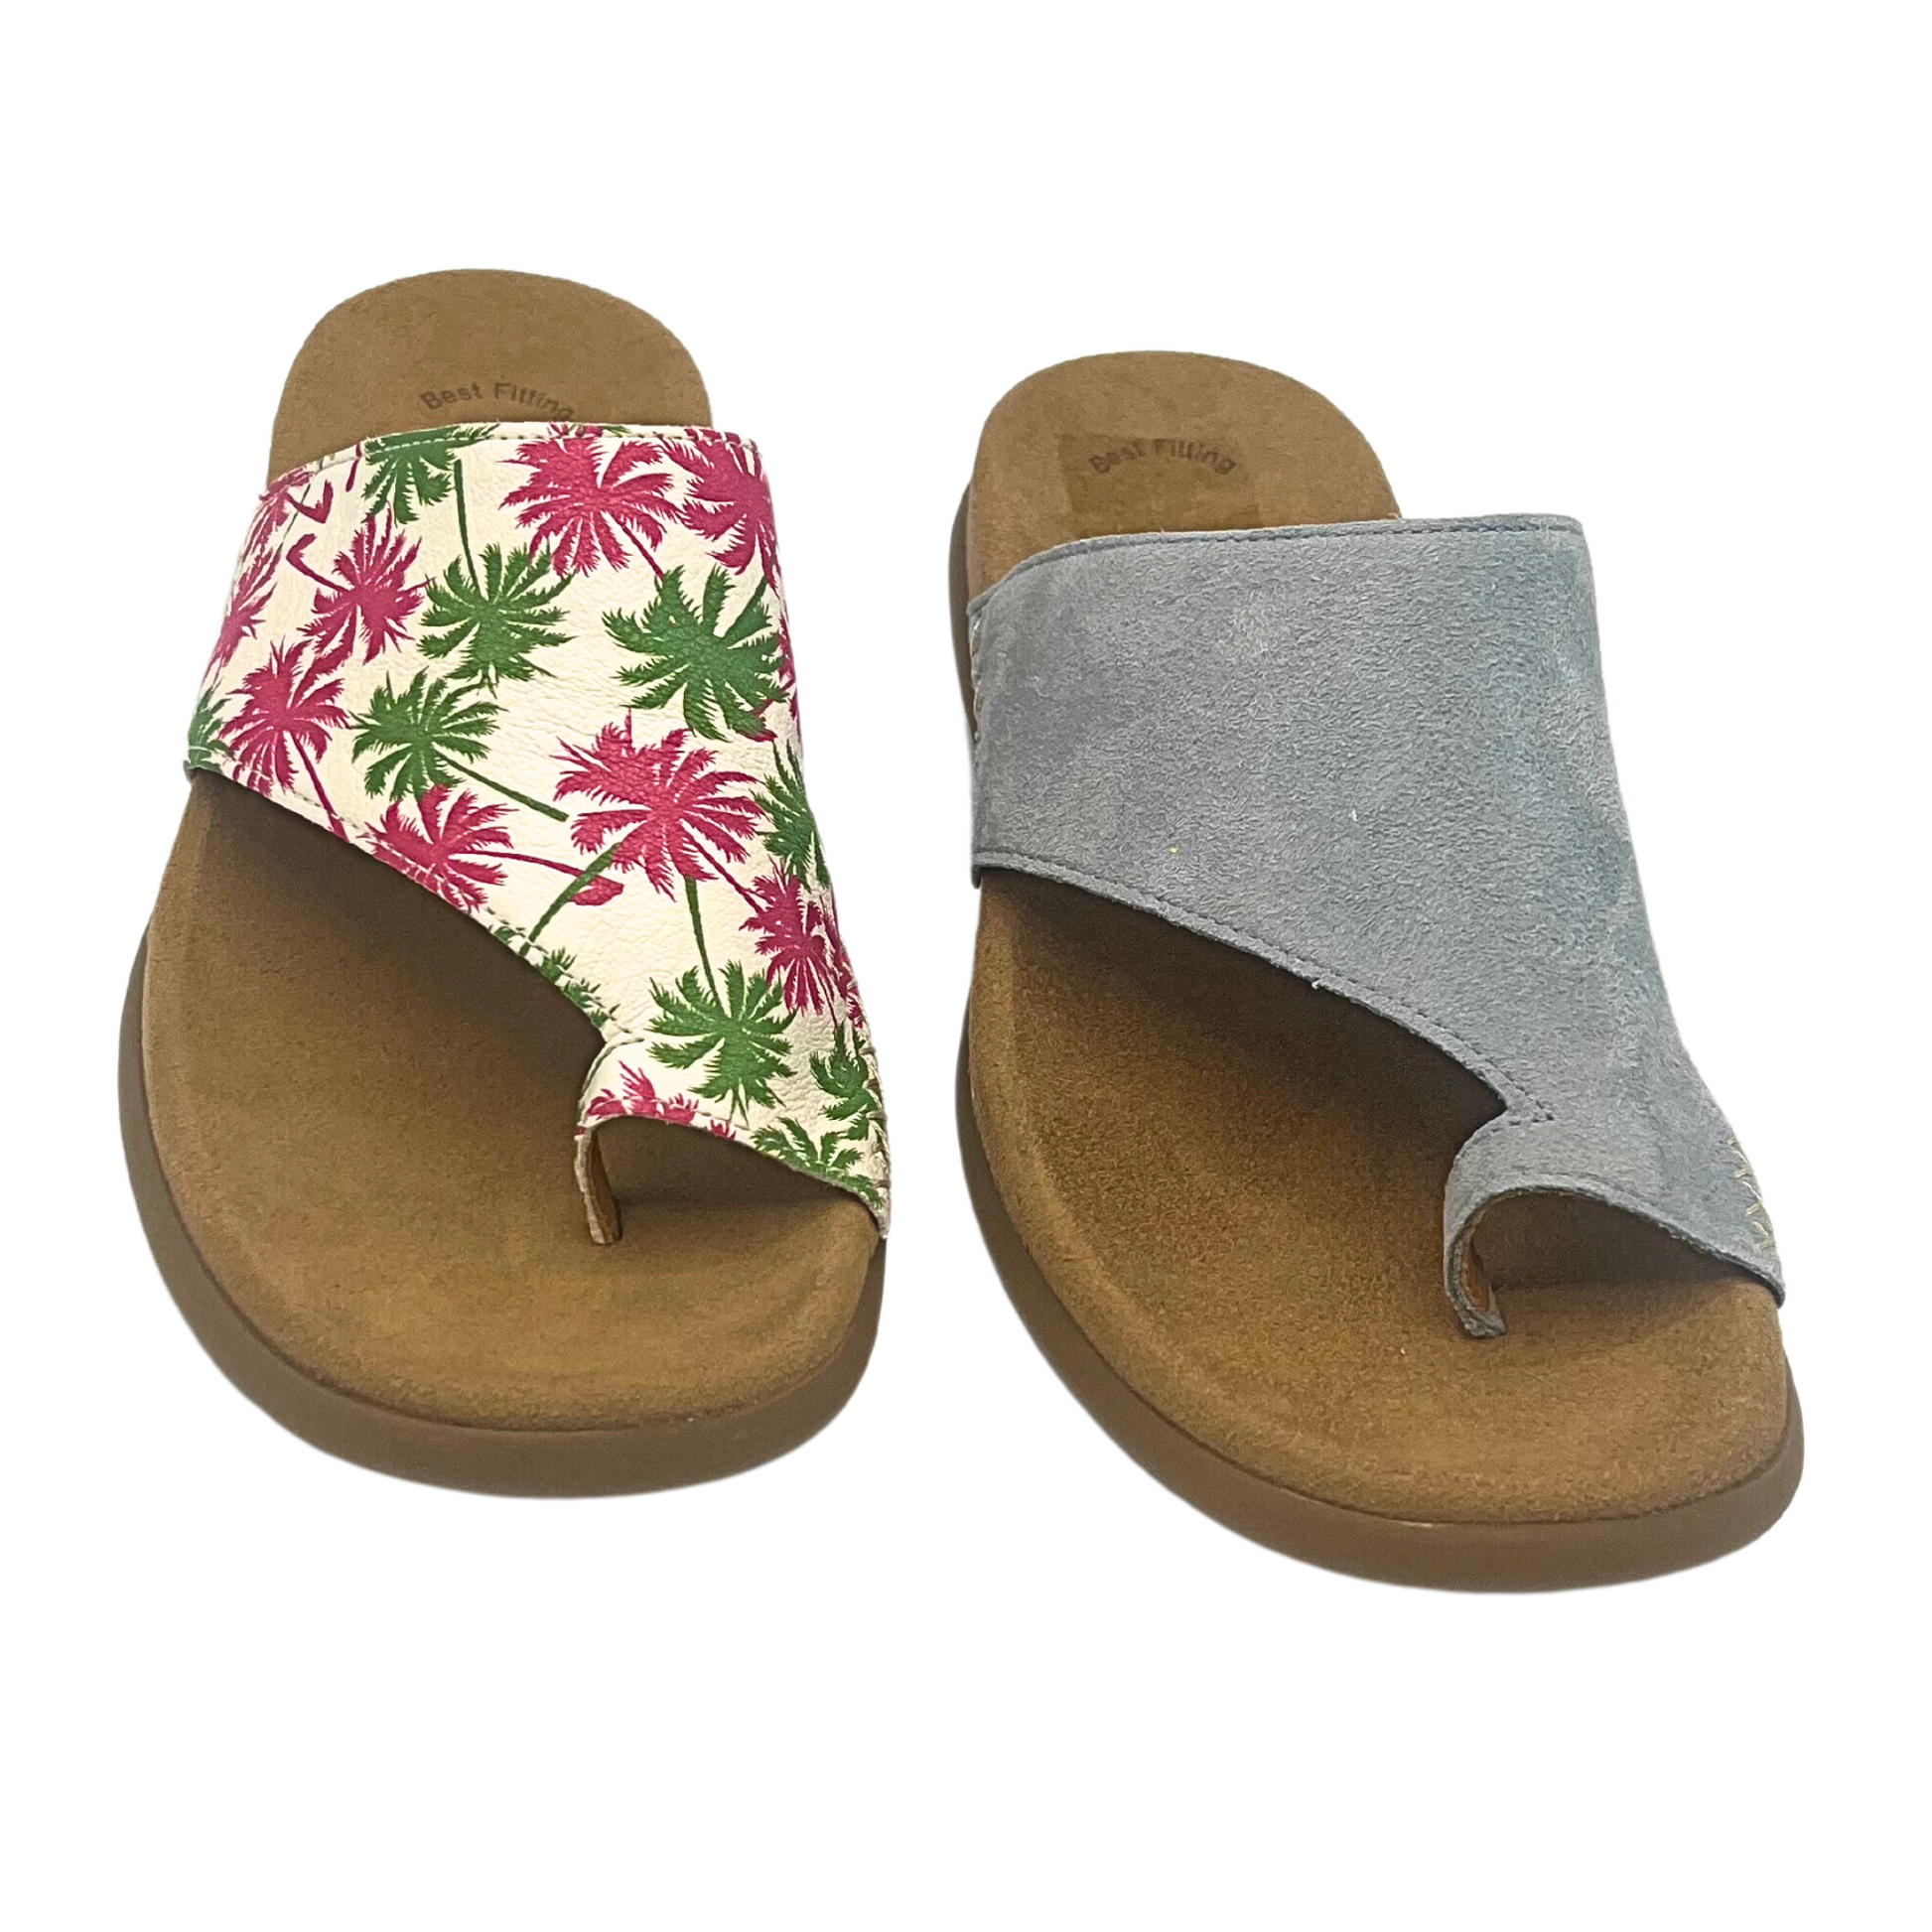 Top down view of Gabor Hamburg sandal in 2 colors - green/pink palms and light blue.